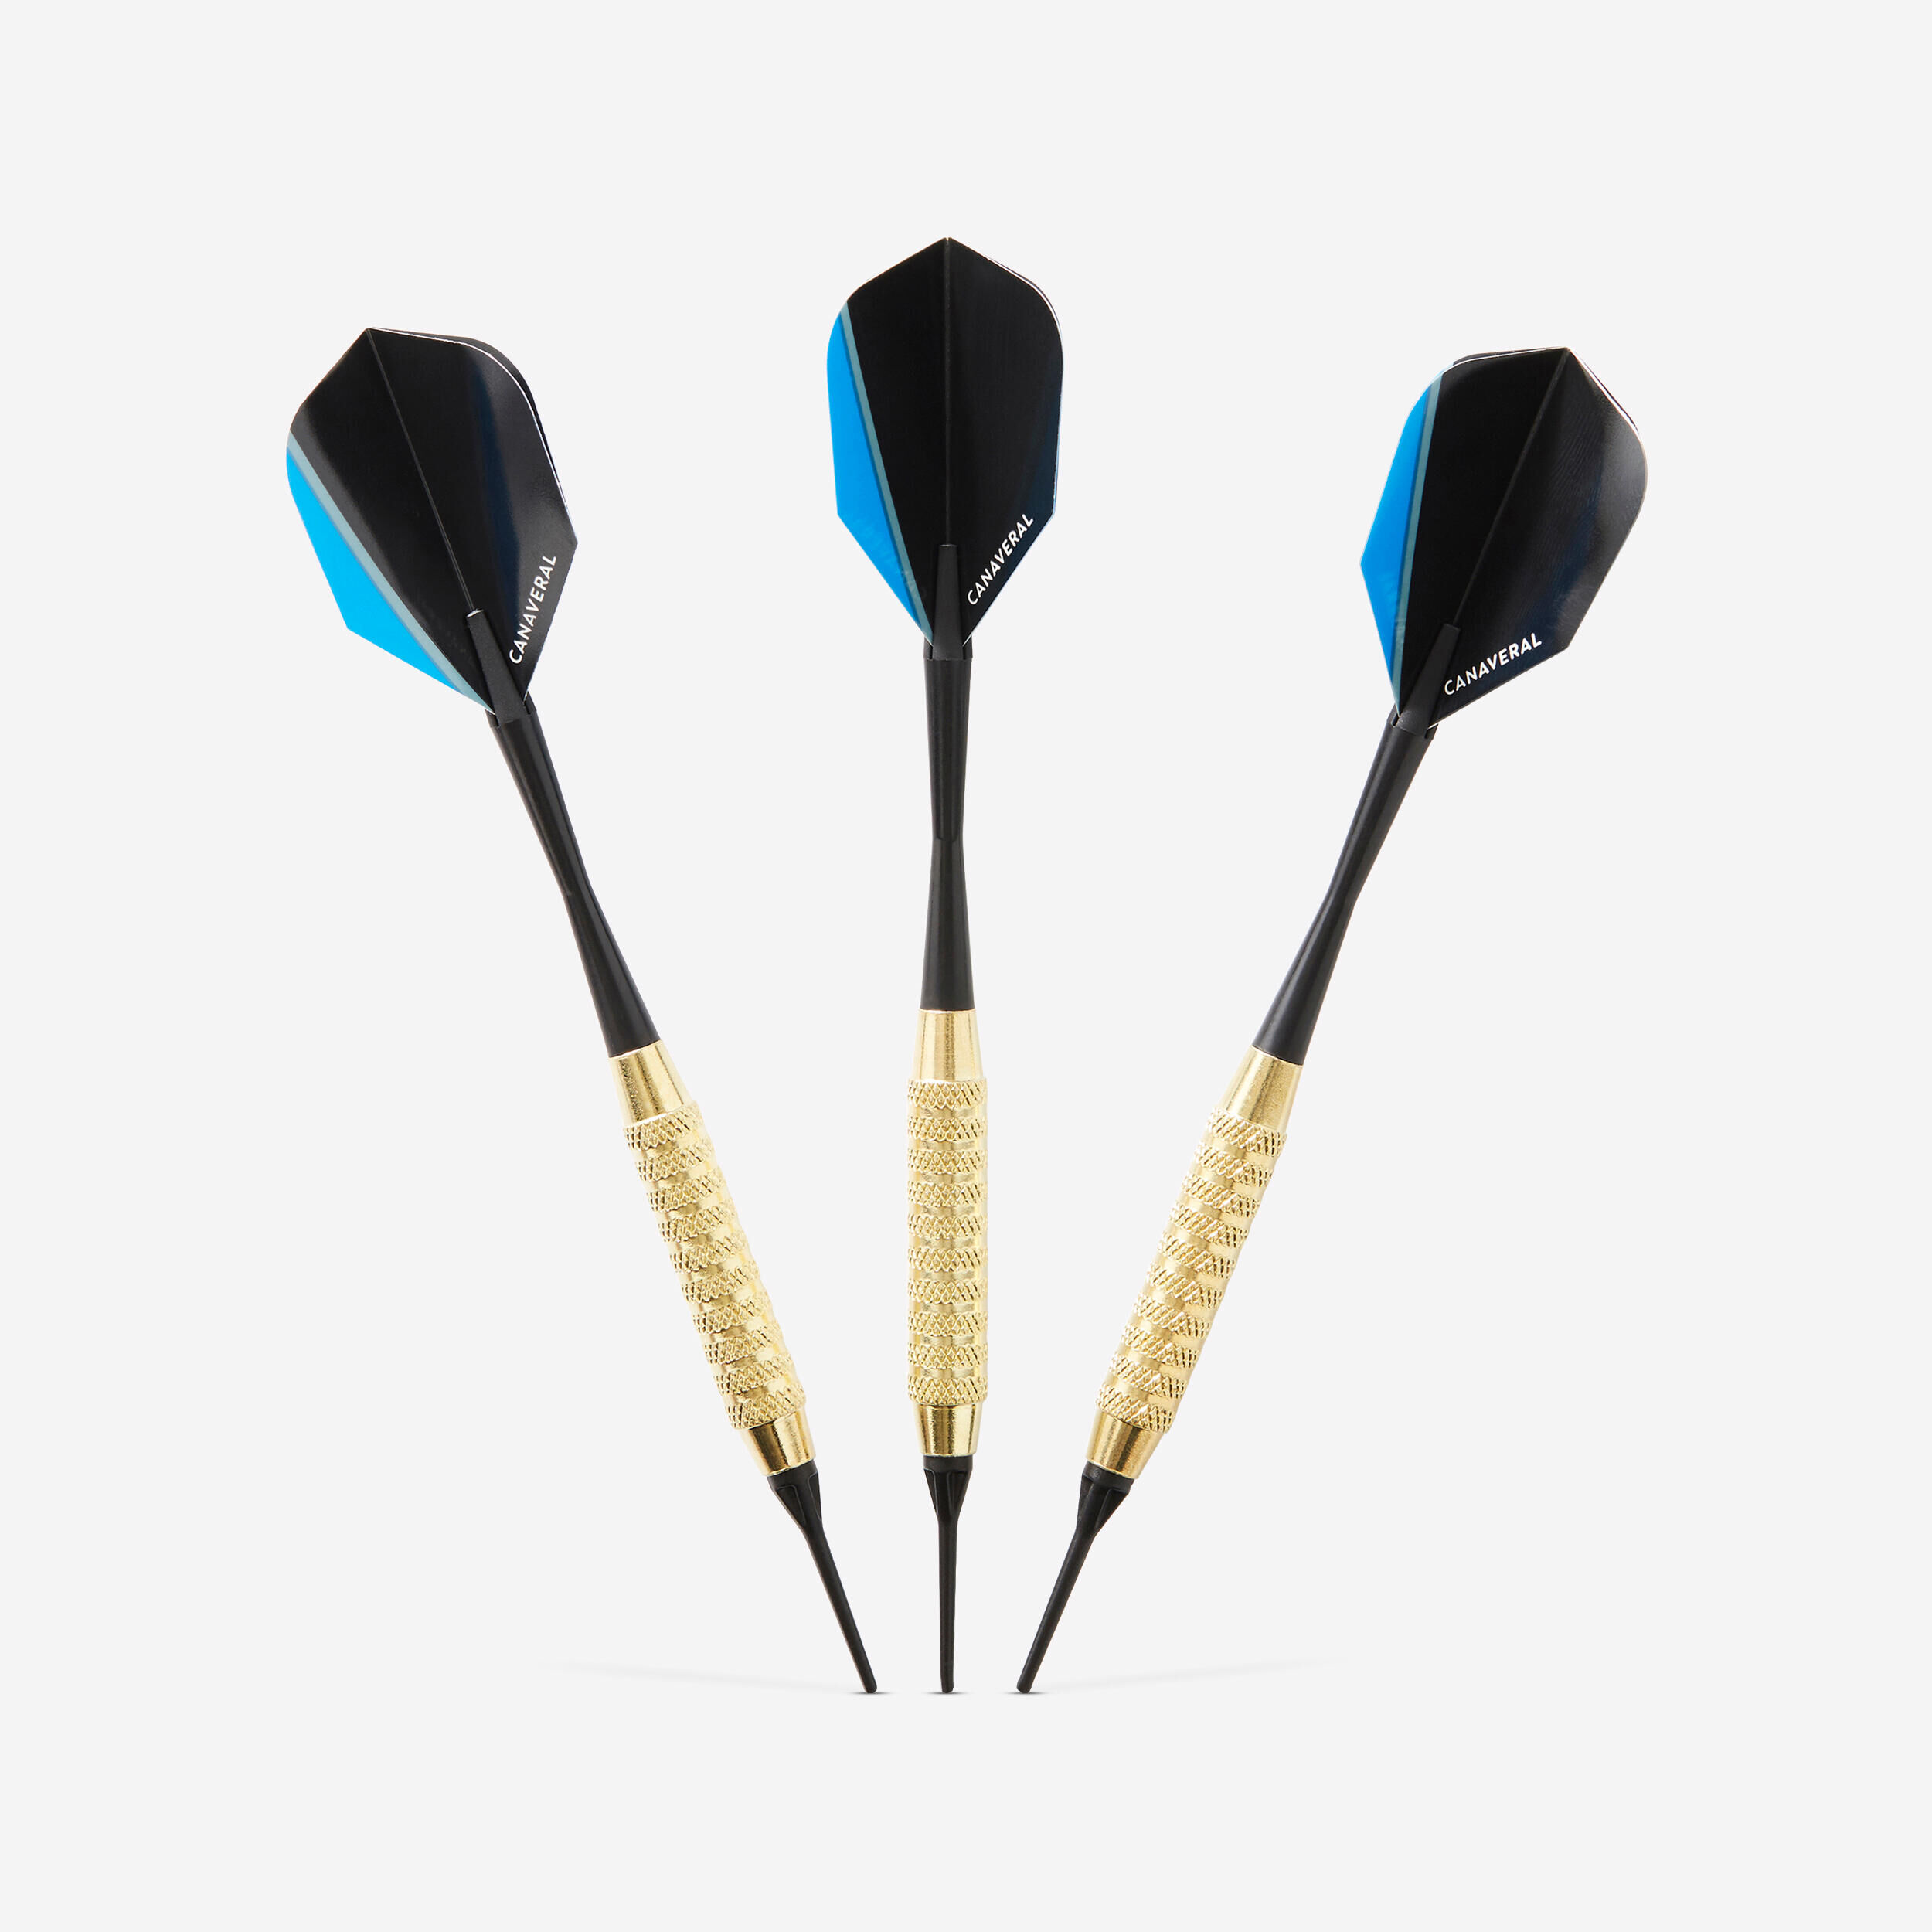 CANAVERAL S120 Soft Tip Darts Tri-Pack